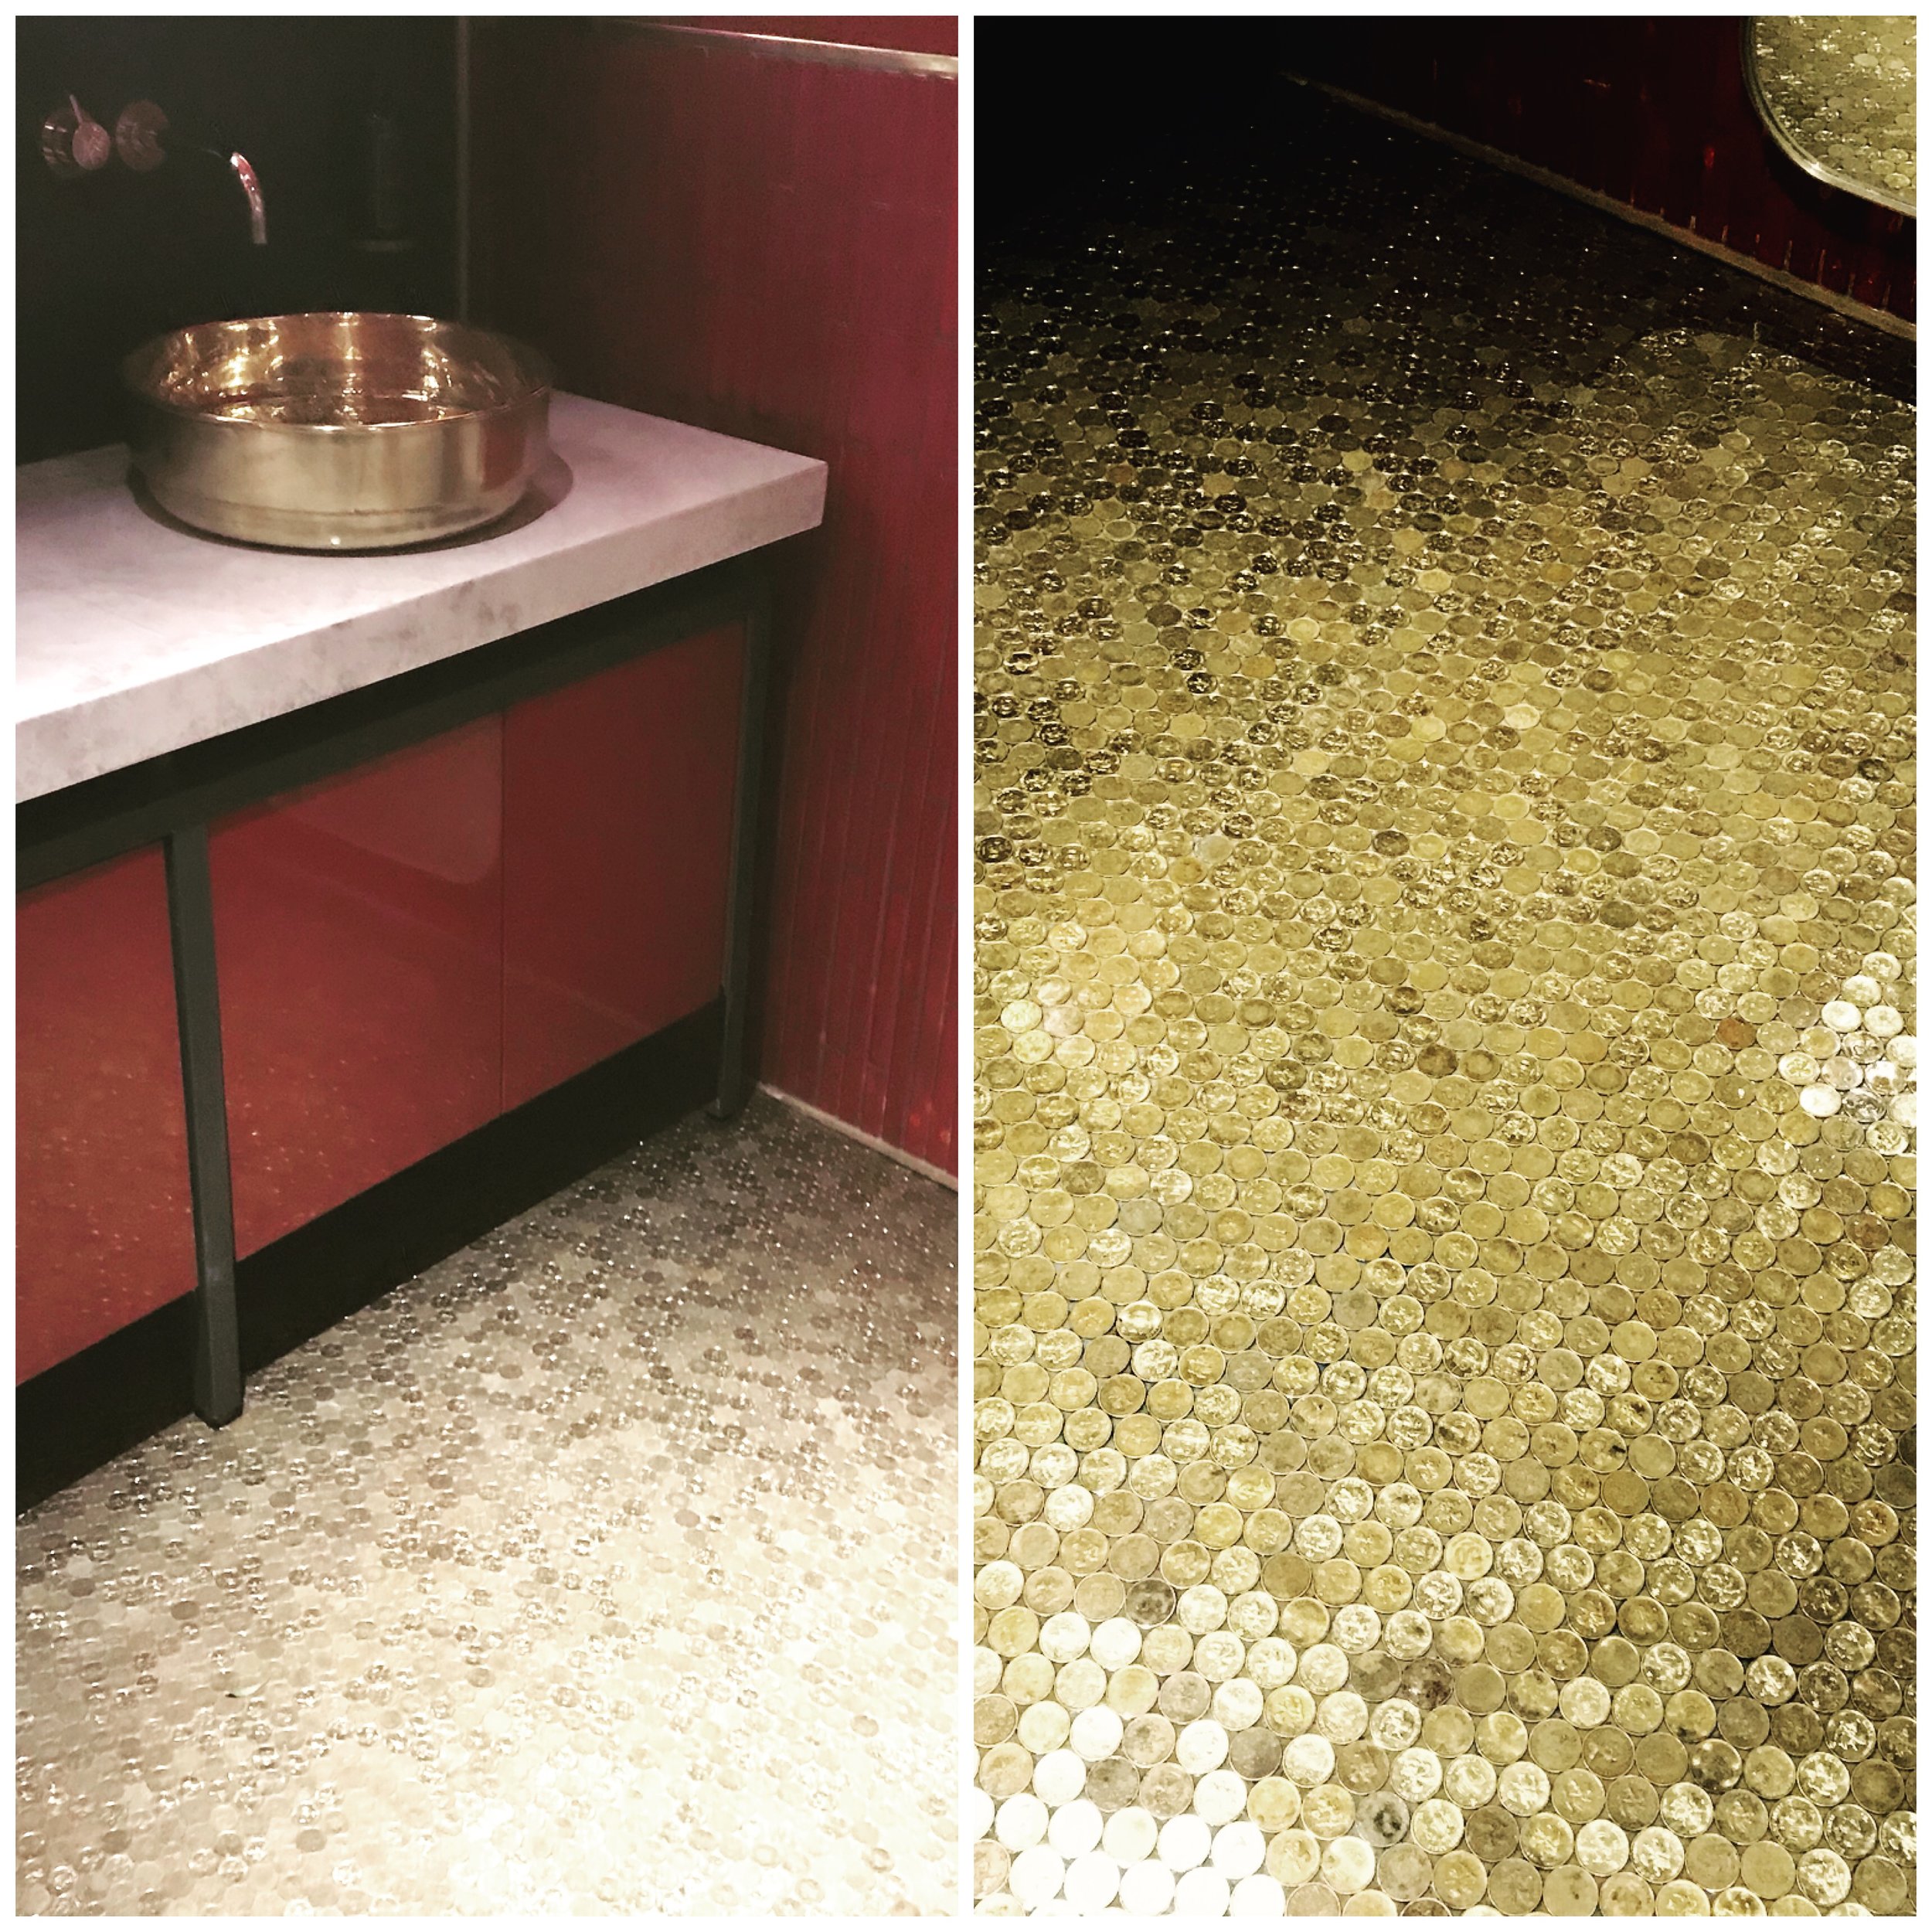 27500 coins cover this floor